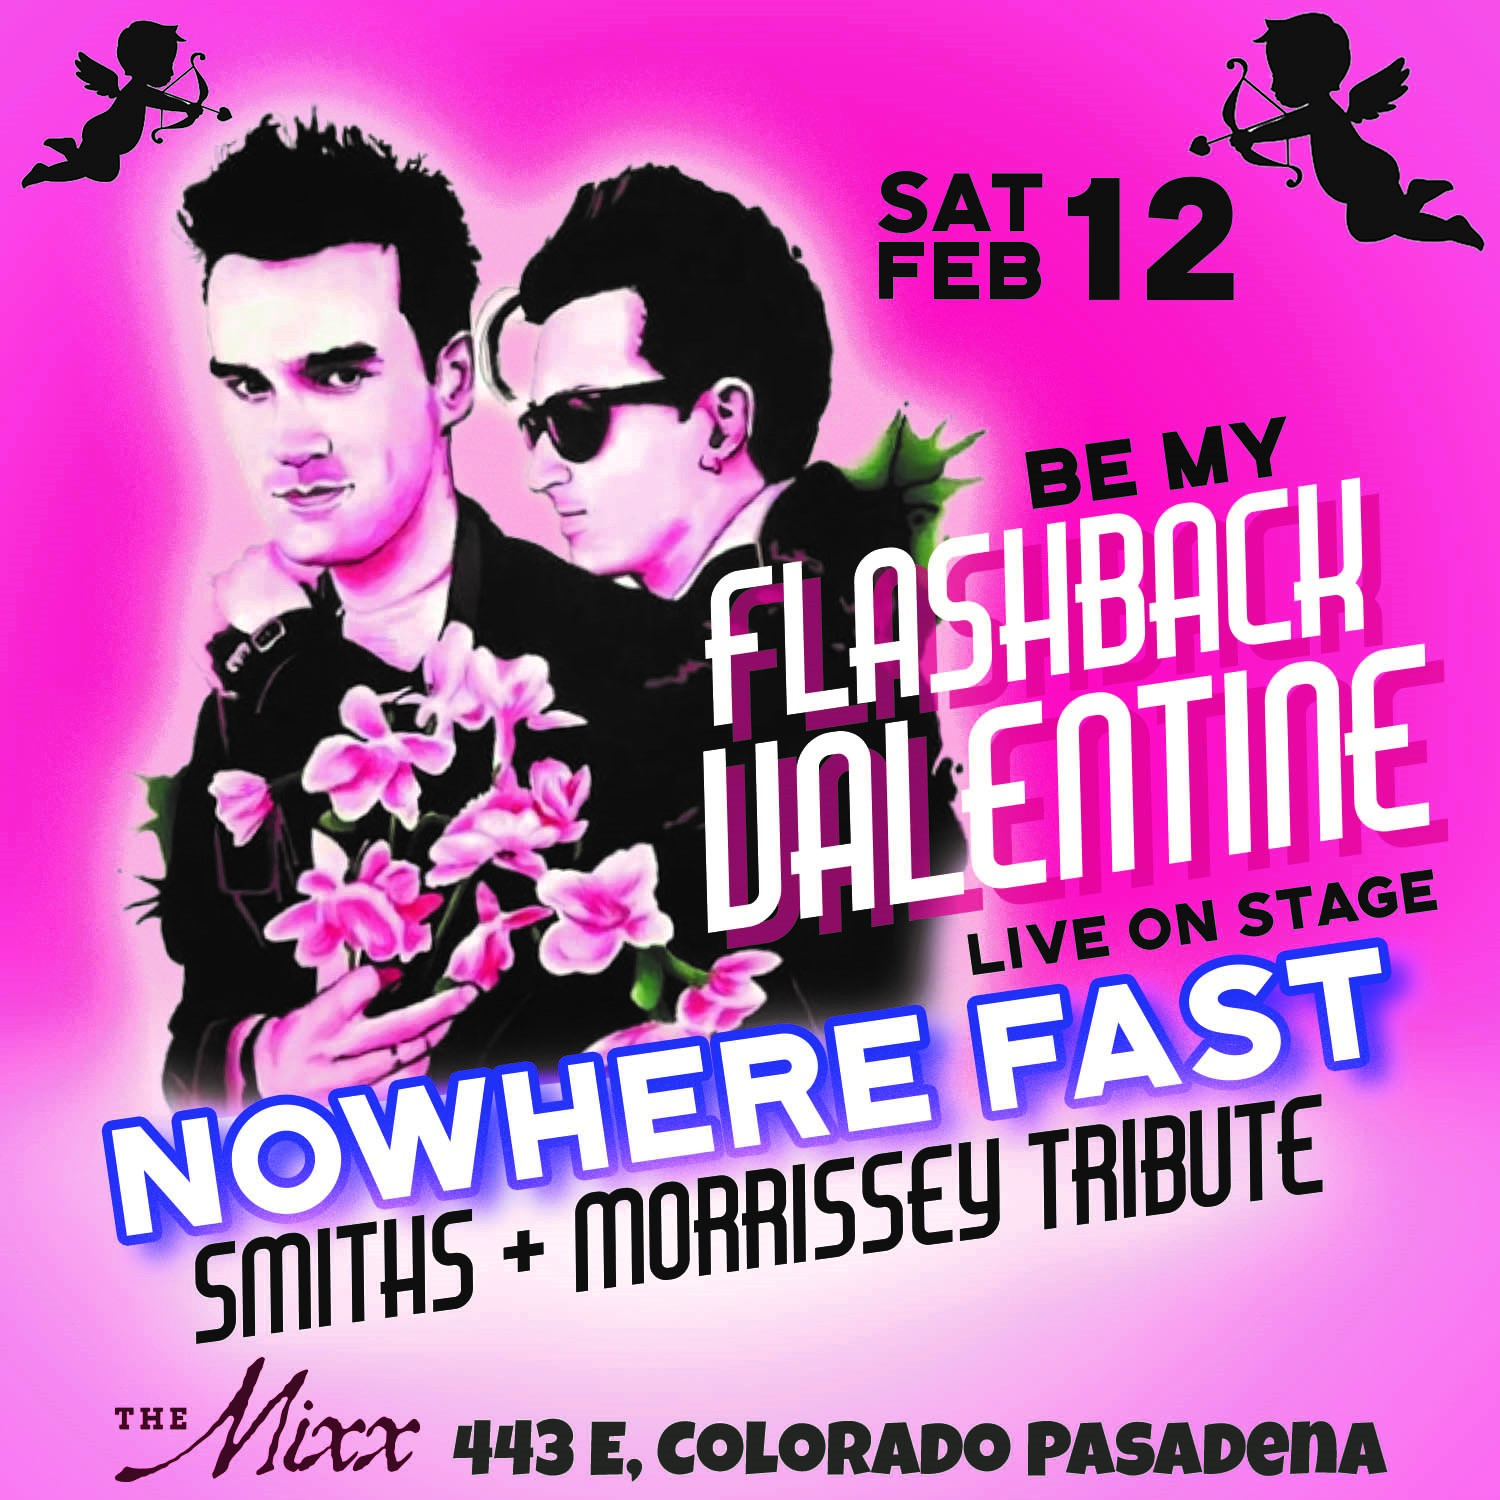 You are currently viewing The Smiths & Morrissey Tribute Flashback Valentine